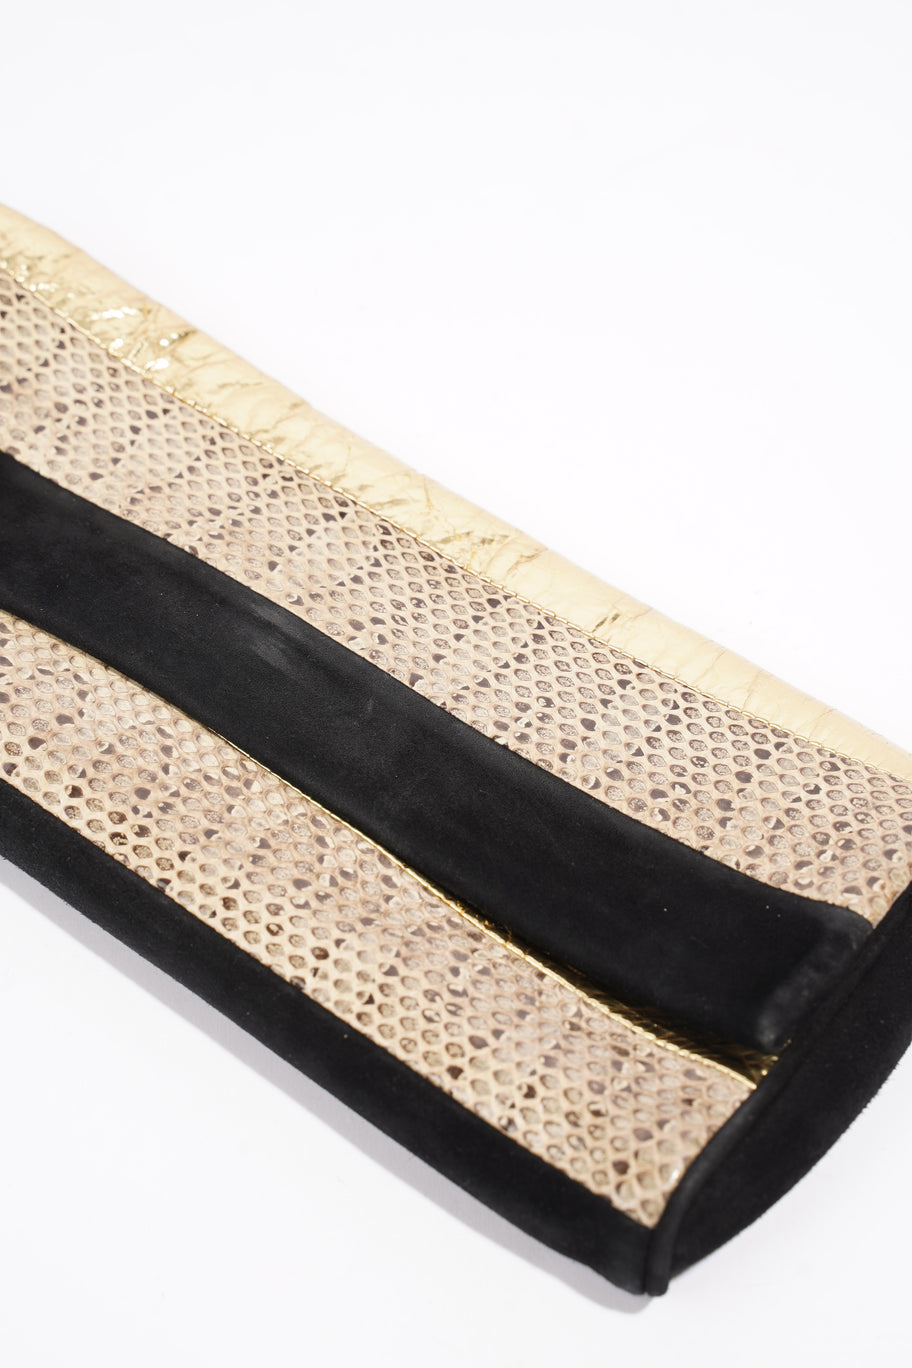 Clutch Bag With Chain Black / Gold Python Image 14